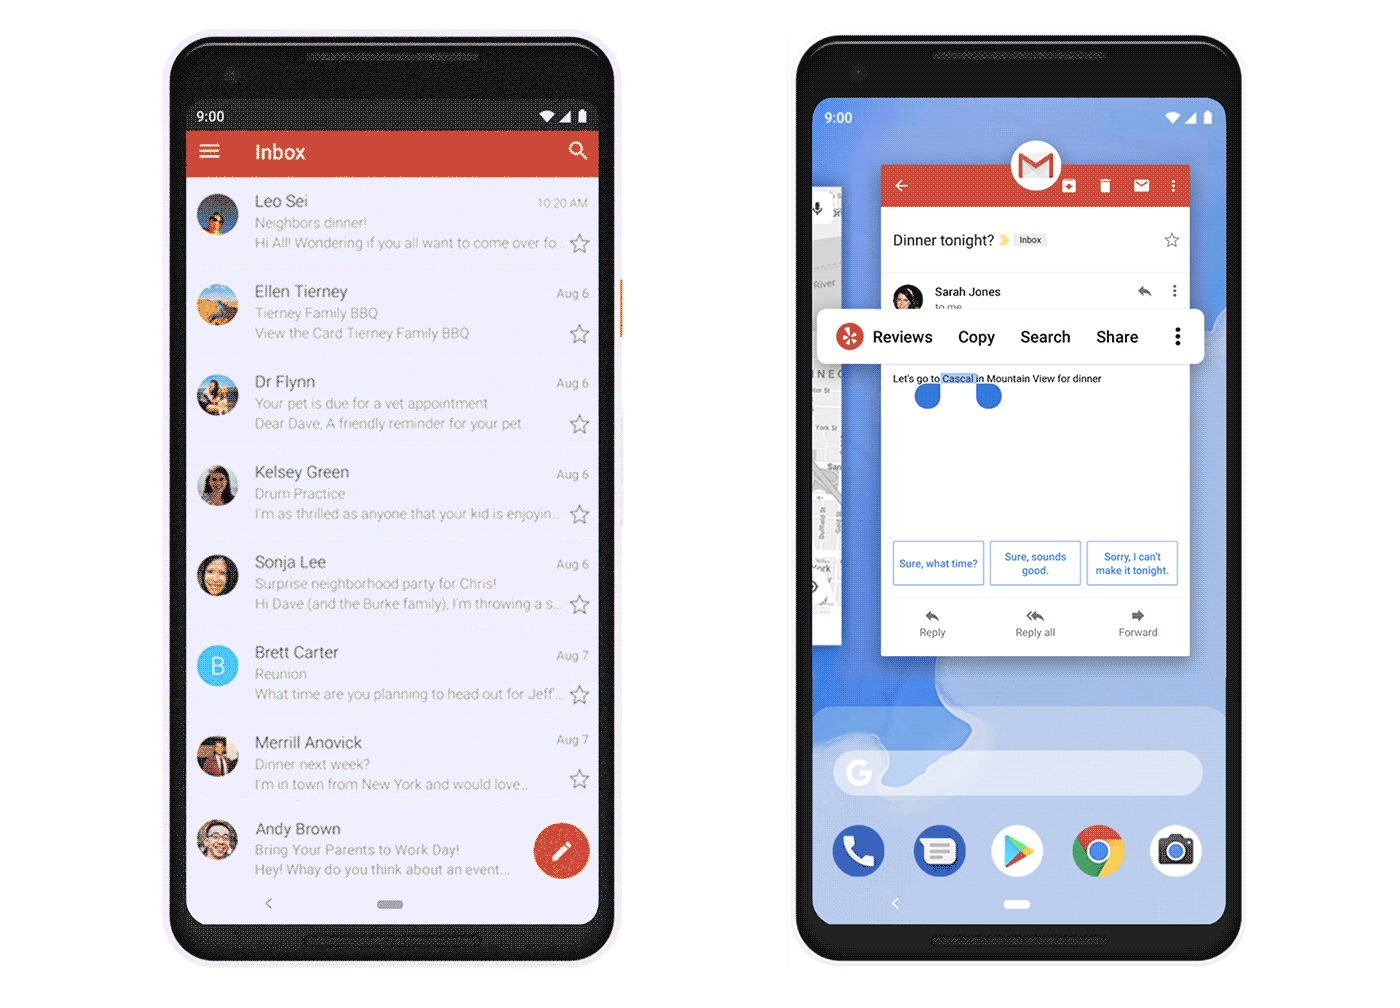   Android 9 Pie: Navigation and Text Selection 